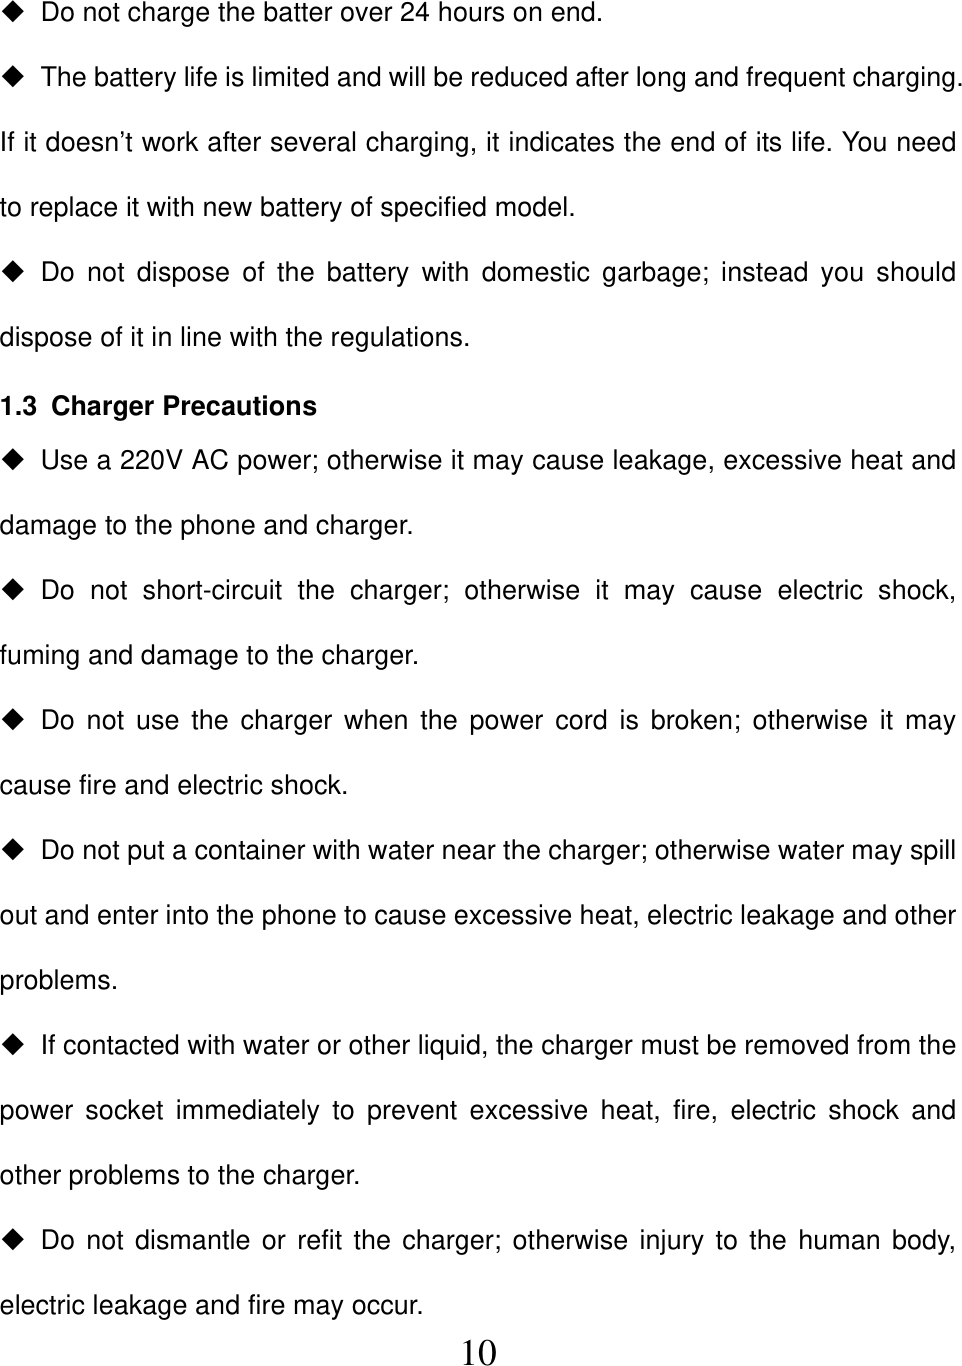  10  Do not charge the batter over 24 hours on end.   The battery life is limited and will be reduced after long and frequent charging. If it doesn’t work after several charging, it indicates the end of its life. You need to replace it with new battery of specified model.  Do not dispose of the battery with domestic garbage; instead you should dispose of it in line with the regulations. 1.3 Charger Precautions   Use a 220V AC power; otherwise it may cause leakage, excessive heat and damage to the phone and charger.  Do not short-circuit the charger; otherwise it may cause electric shock, fuming and damage to the charger.  Do not use the charger when the power cord is broken; otherwise it may cause fire and electric shock.   Do not put a container with water near the charger; otherwise water may spill out and enter into the phone to cause excessive heat, electric leakage and other problems.   If contacted with water or other liquid, the charger must be removed from the power socket immediately to prevent excessive heat, fire, electric shock and other problems to the charger.  Do not dismantle or refit the charger; otherwise injury to the human body, electric leakage and fire may occur. 